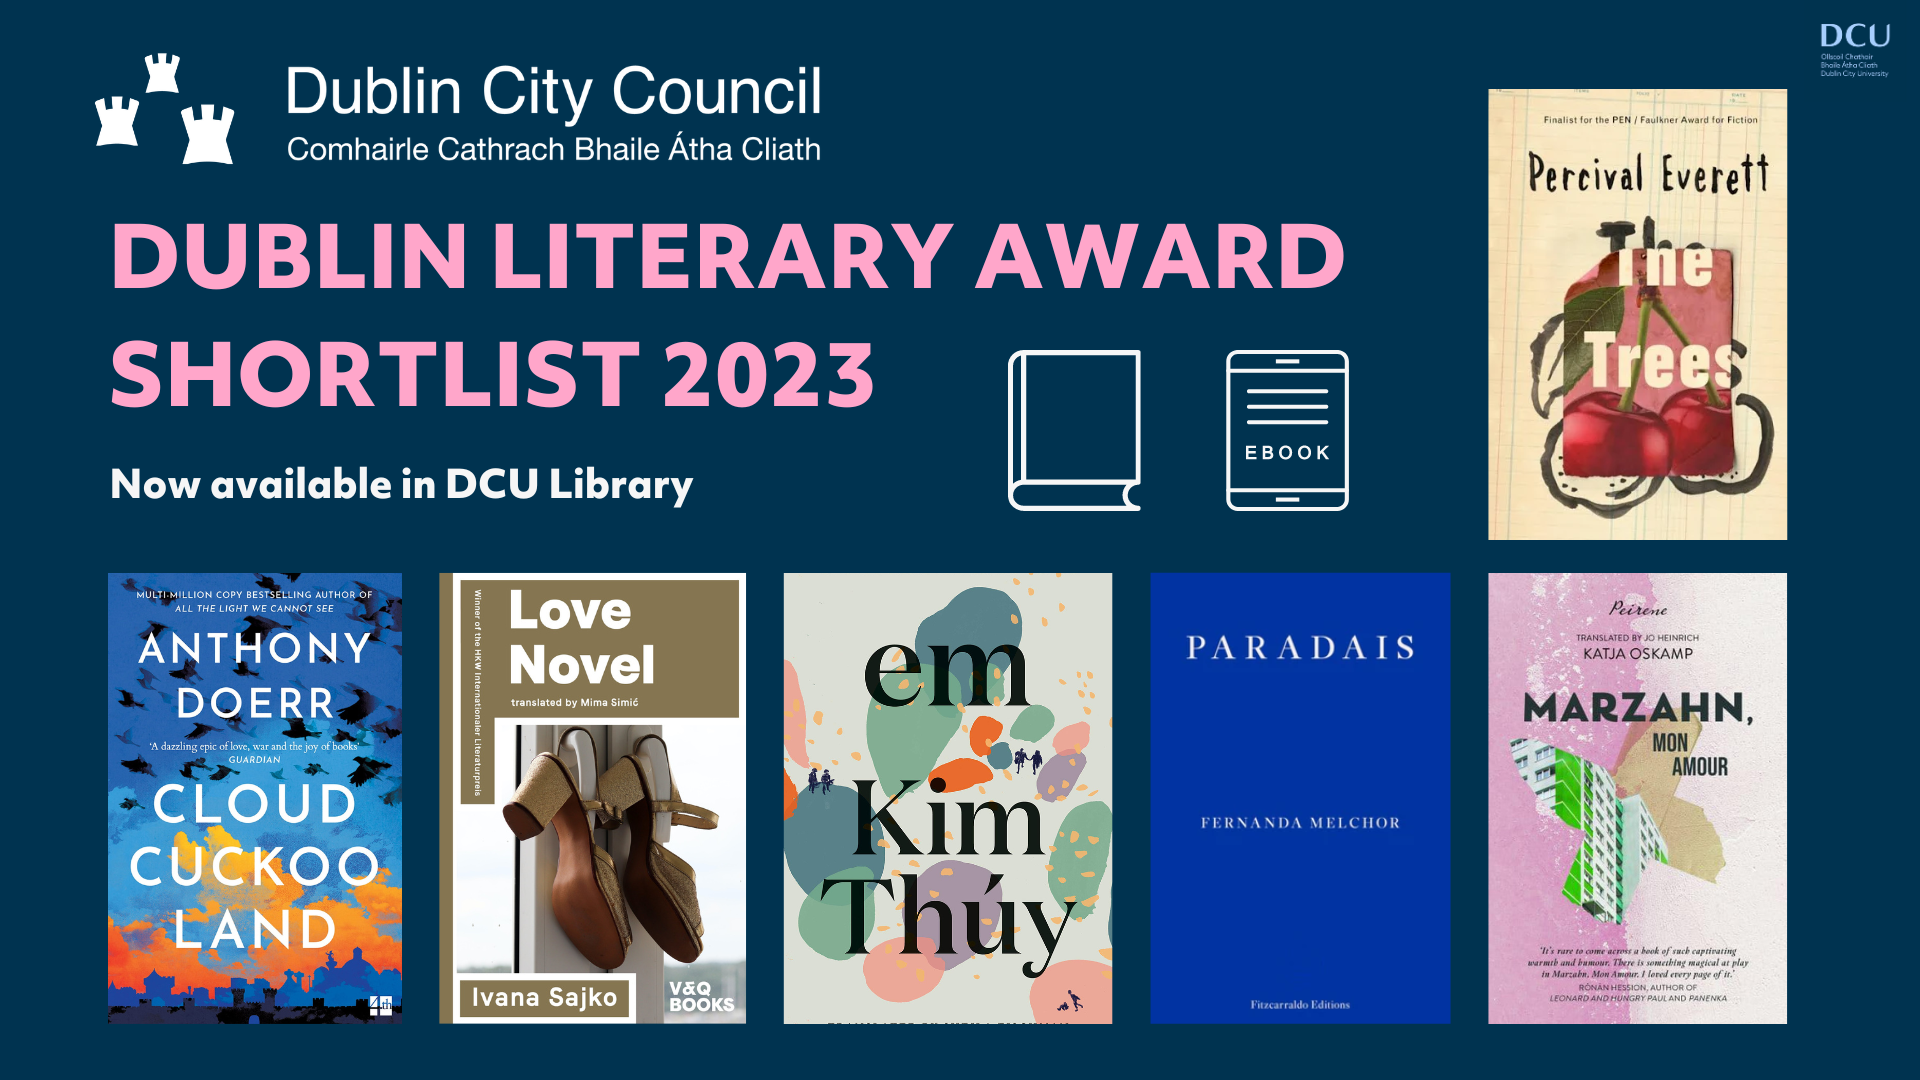 Text on the image reads Dublin City Council, Dublin Literary Award Shortlist 2023, now available in DCU Library above the cover art of the six shortlisted books